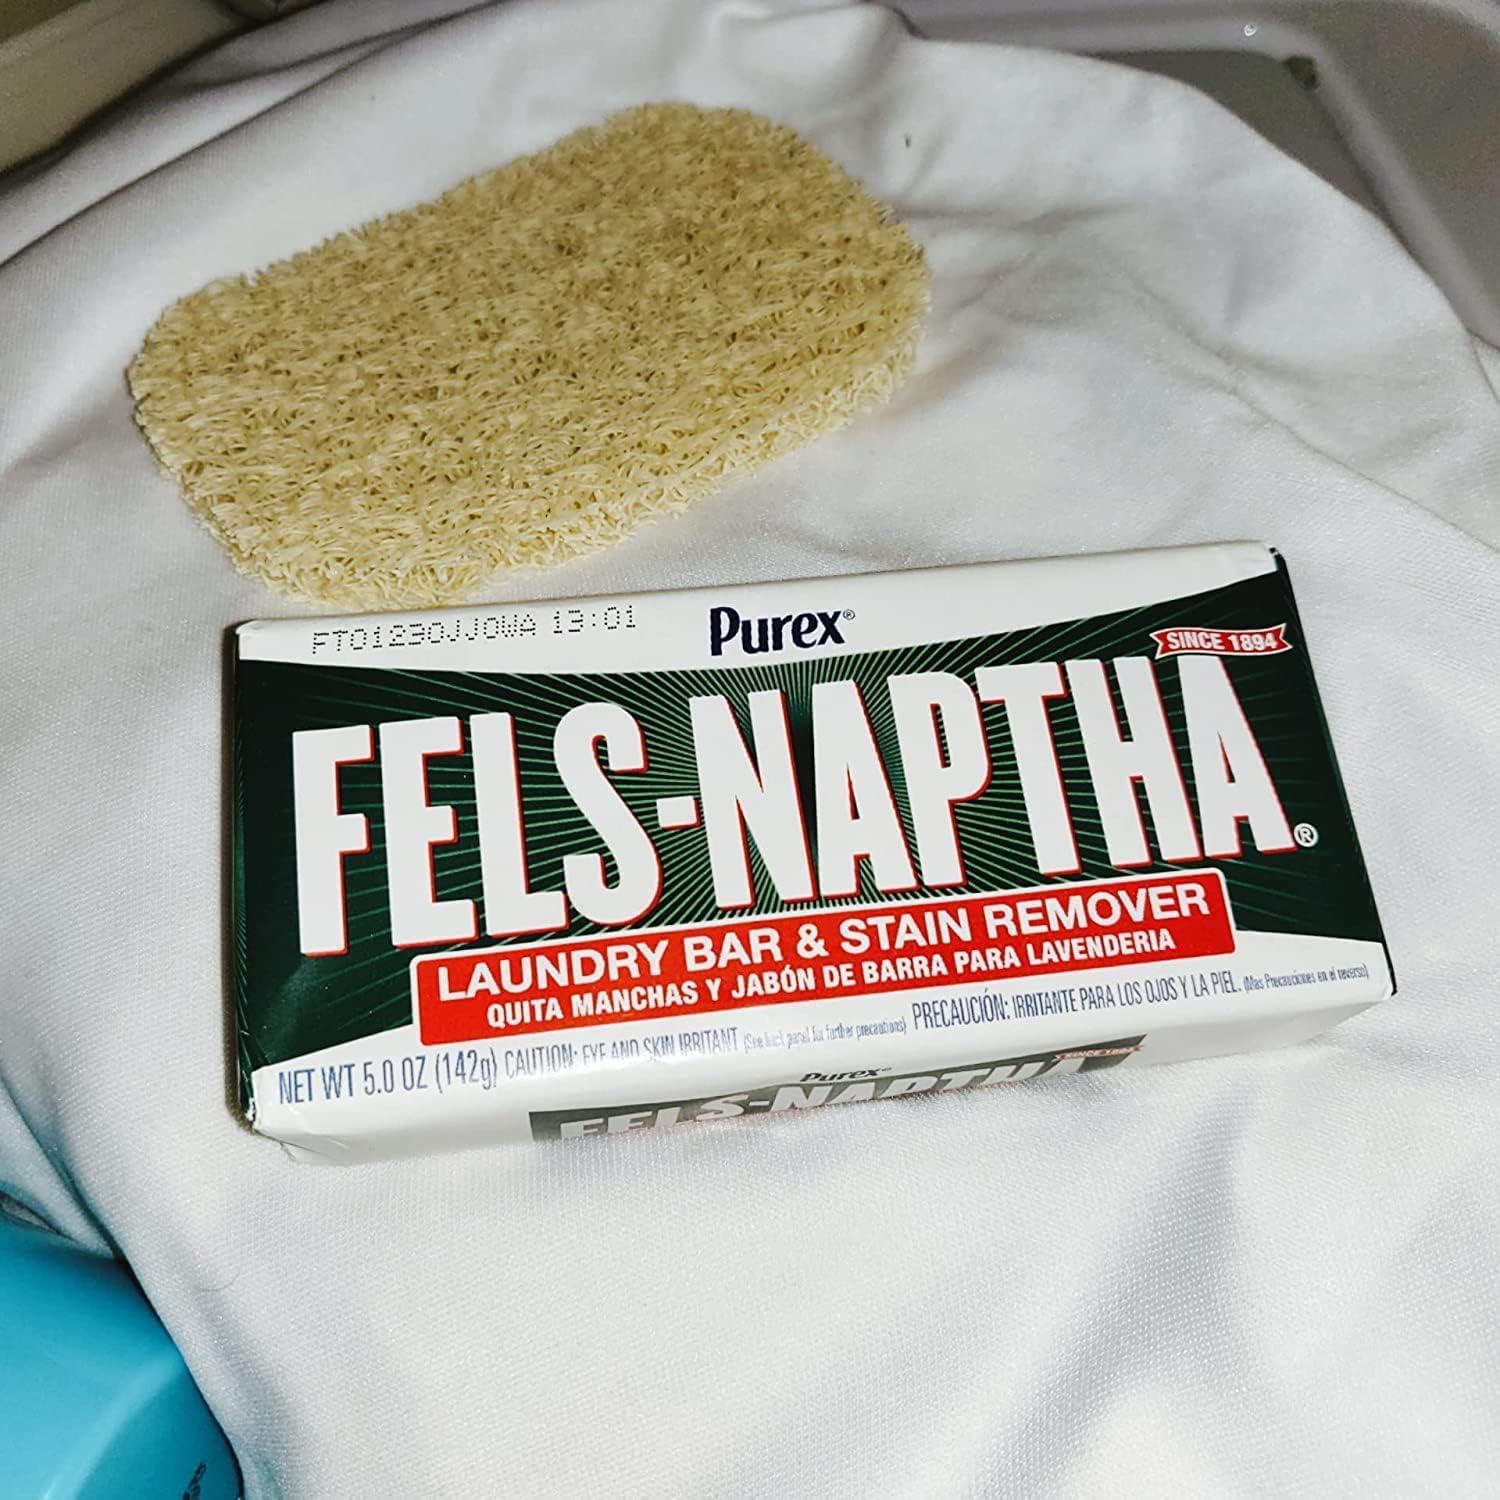 Fels Naptha Laundry Bar and Stain Remover, 5.0 Ounce (Pack of 4) with Aurecor Soap Pad : Health & Household